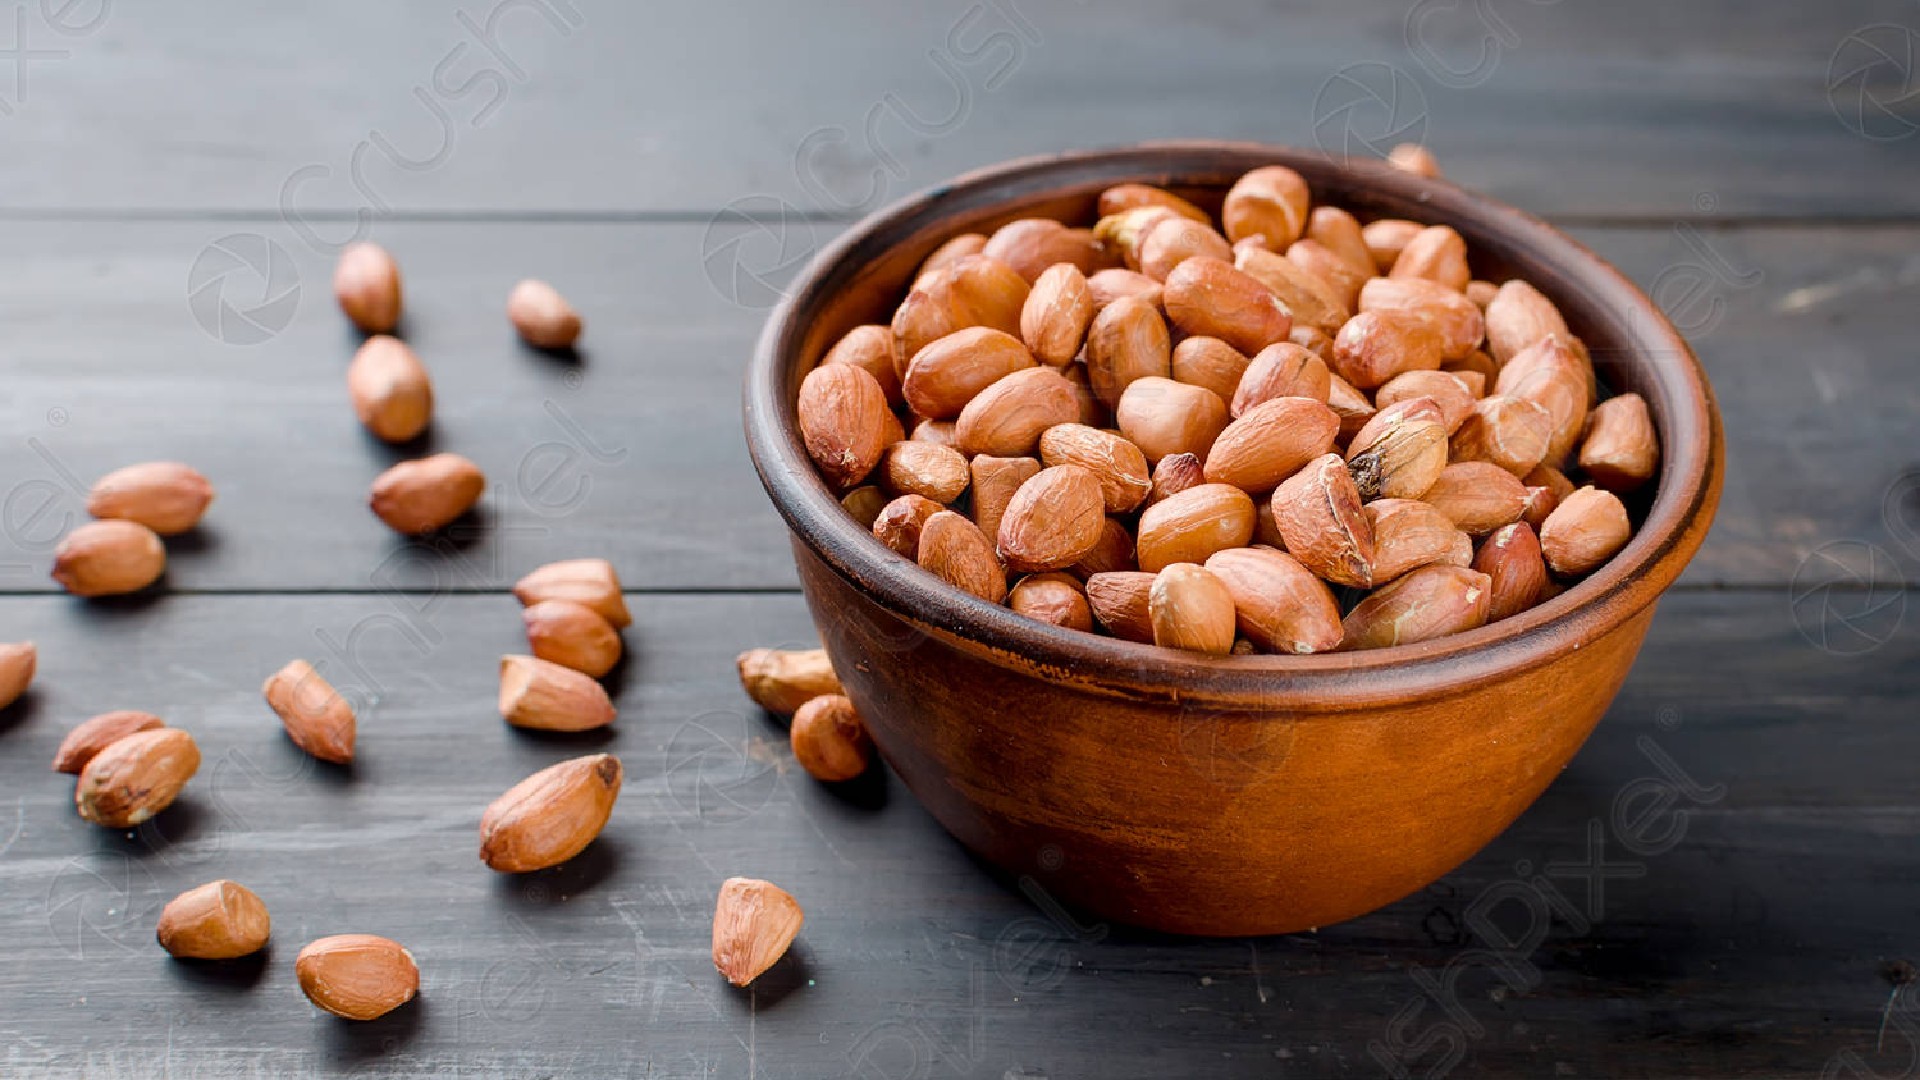 5 Unique Ways To Jazz Up A Bowl Of Peanuts